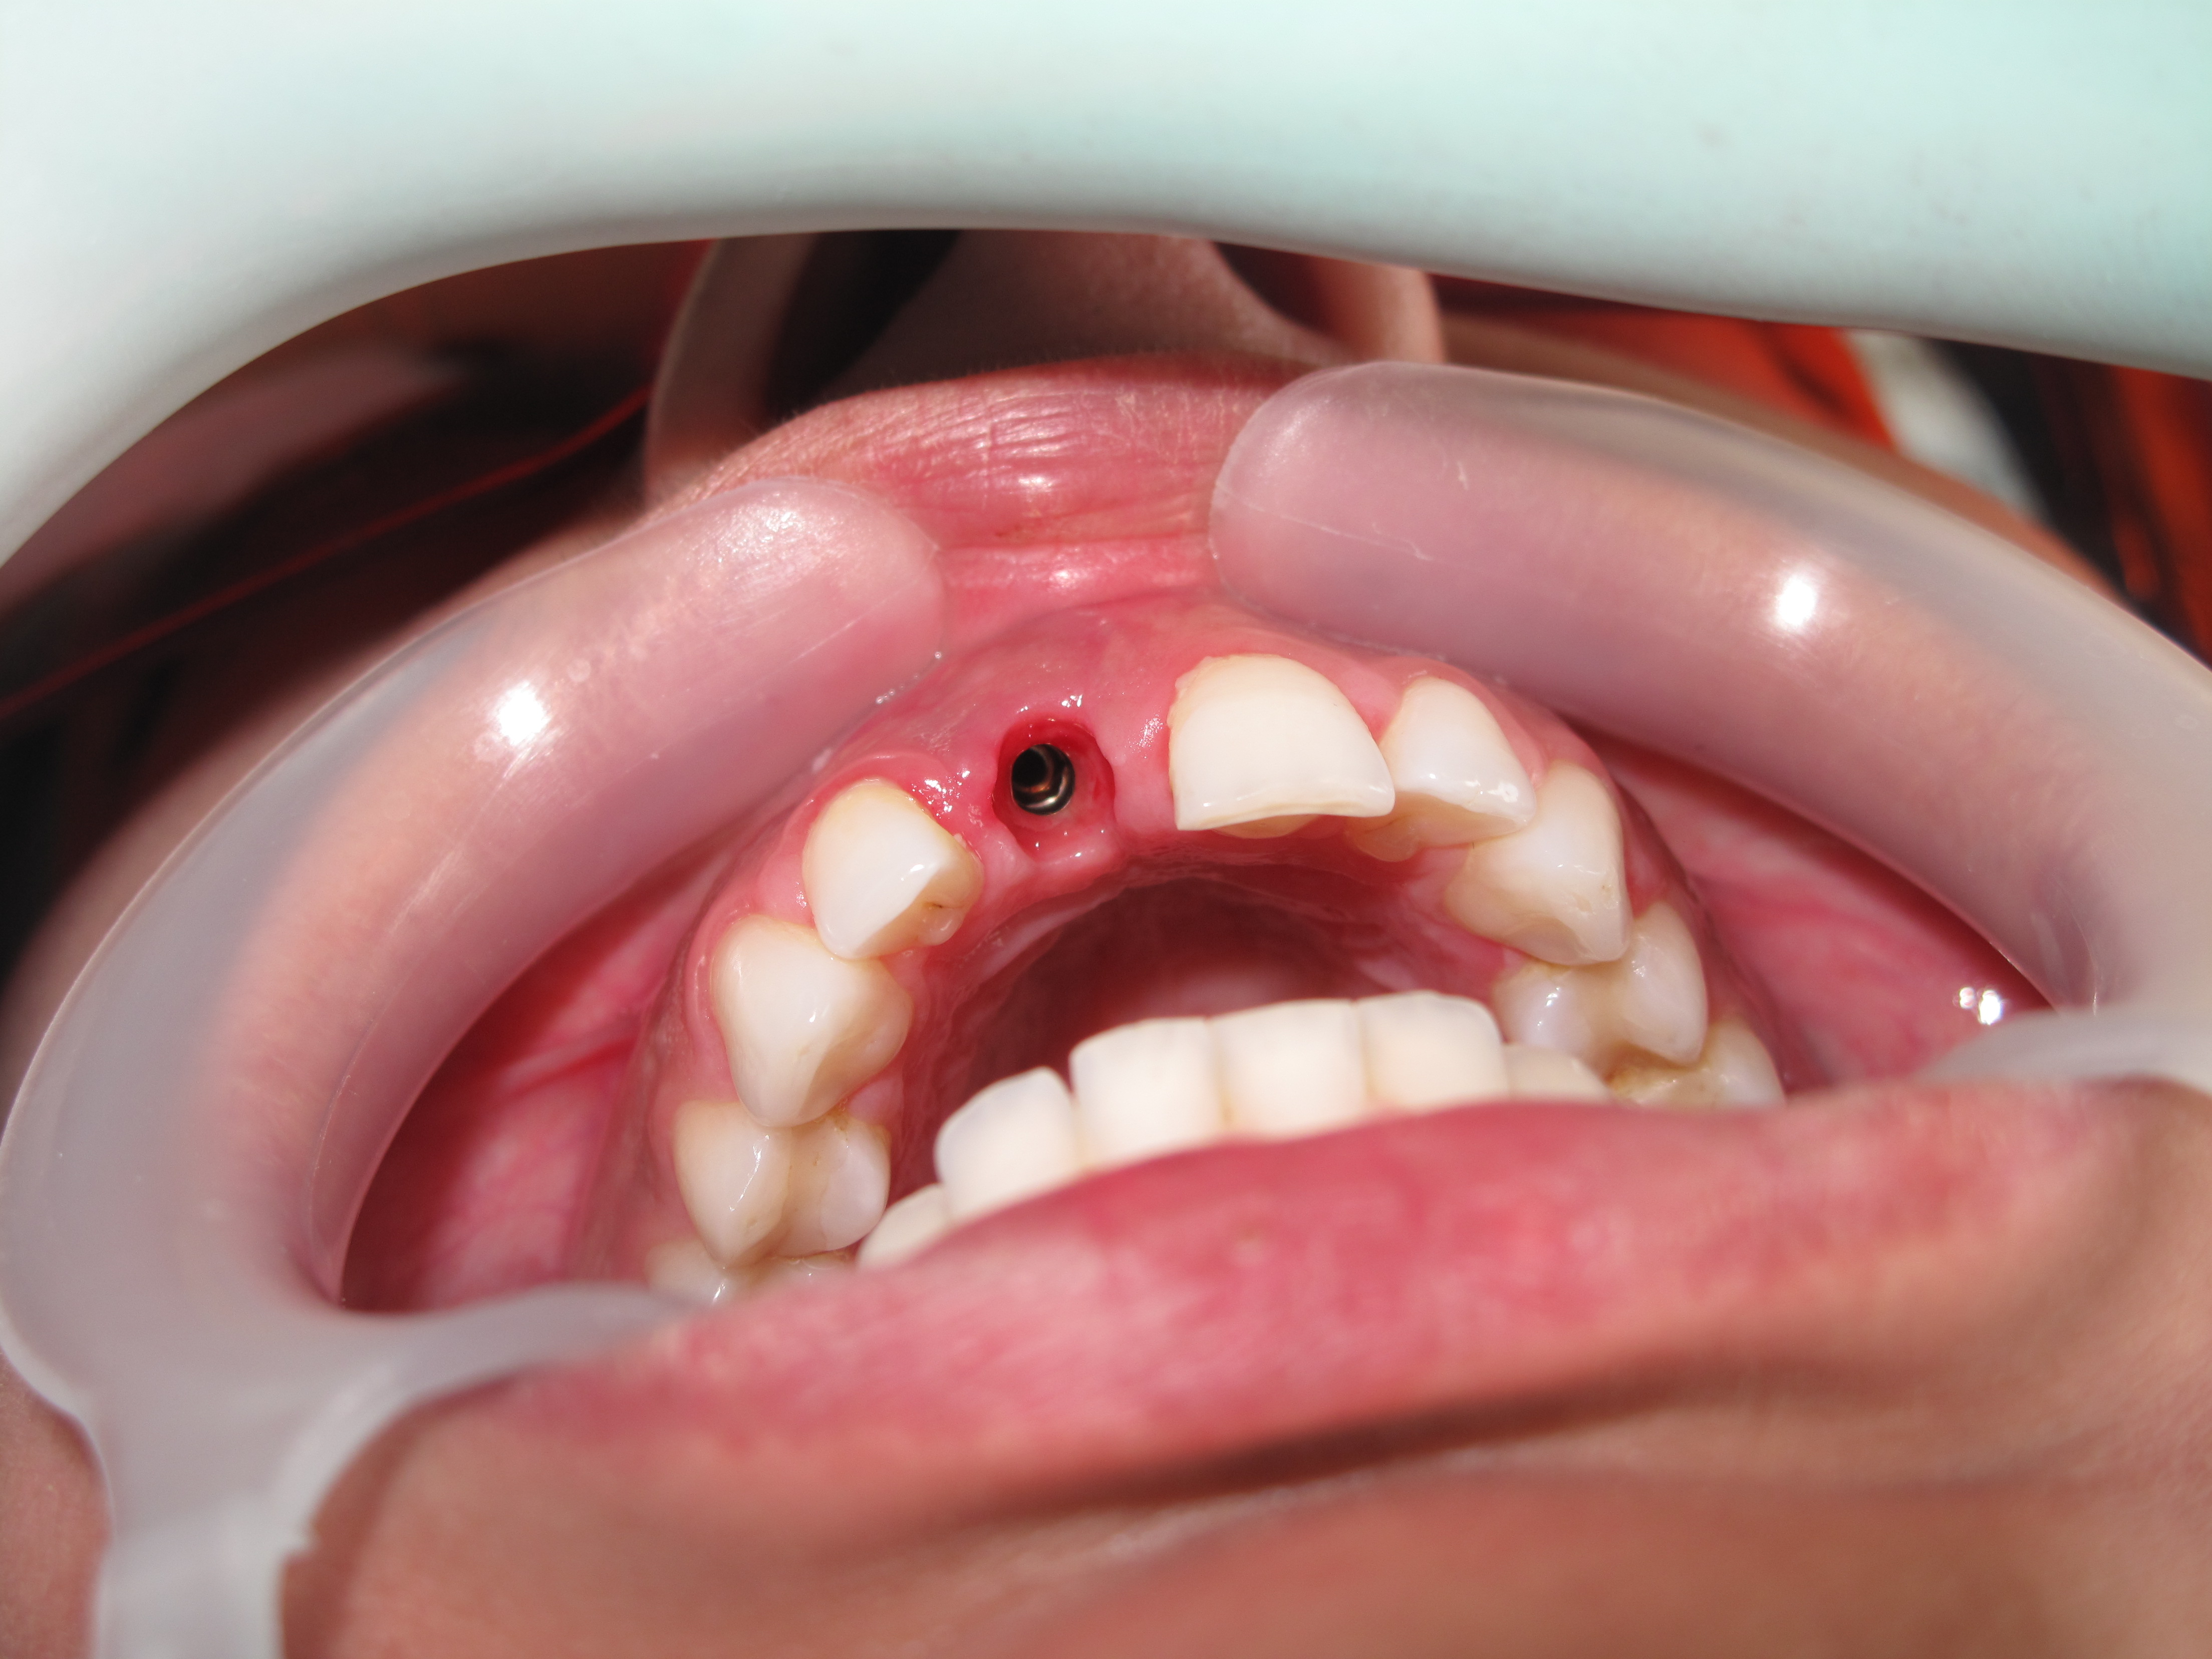 Oral Surgery Pictures 40